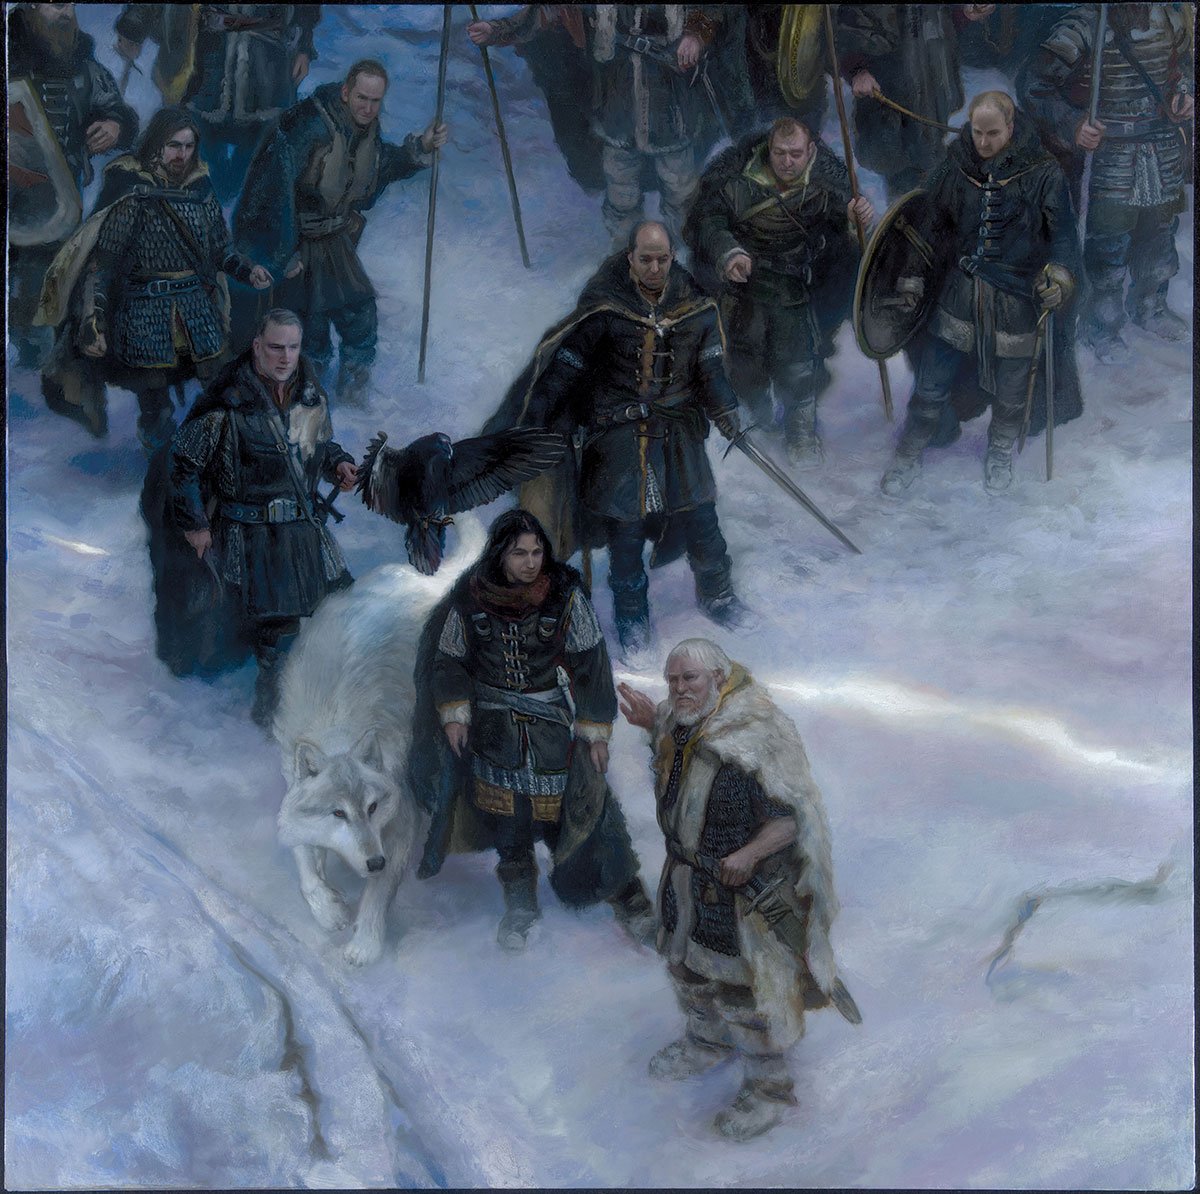 The Night's Watch - Jon Snow
30" x 30"  oil on Panel  2014
Collection of George R.R. Martin